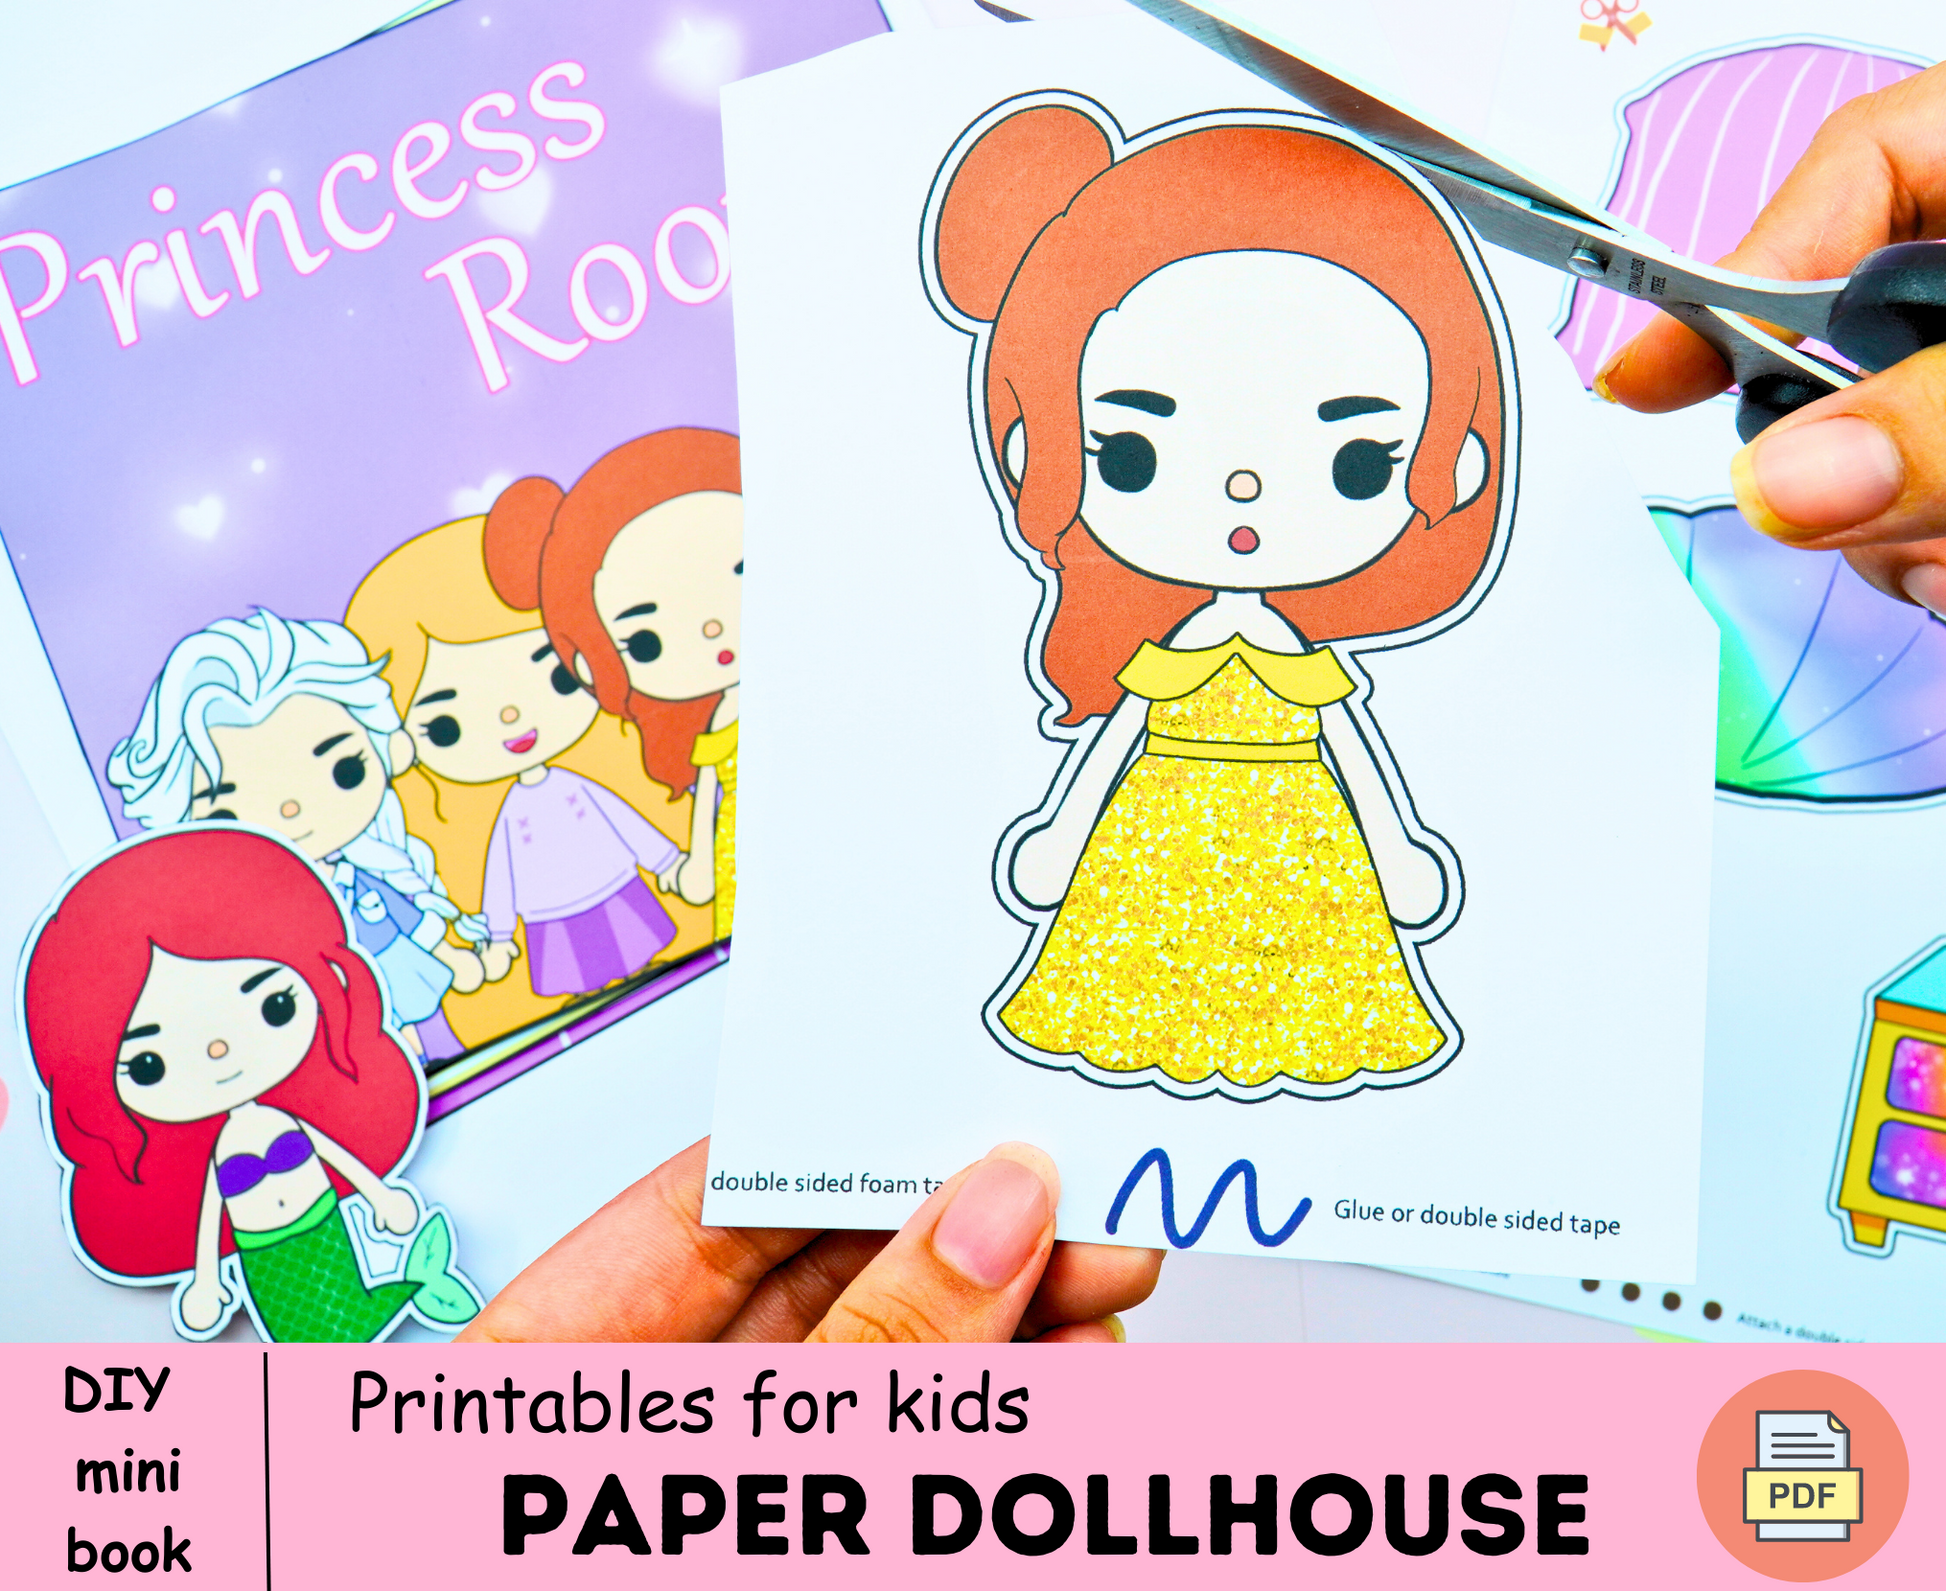 Pretty Toca boca paper dollhouse printable 🌈Toca Boca papercraft |  Printable Paper Doll | Activtiy book digital products best seller 🎁 Woa  Doll Crafts